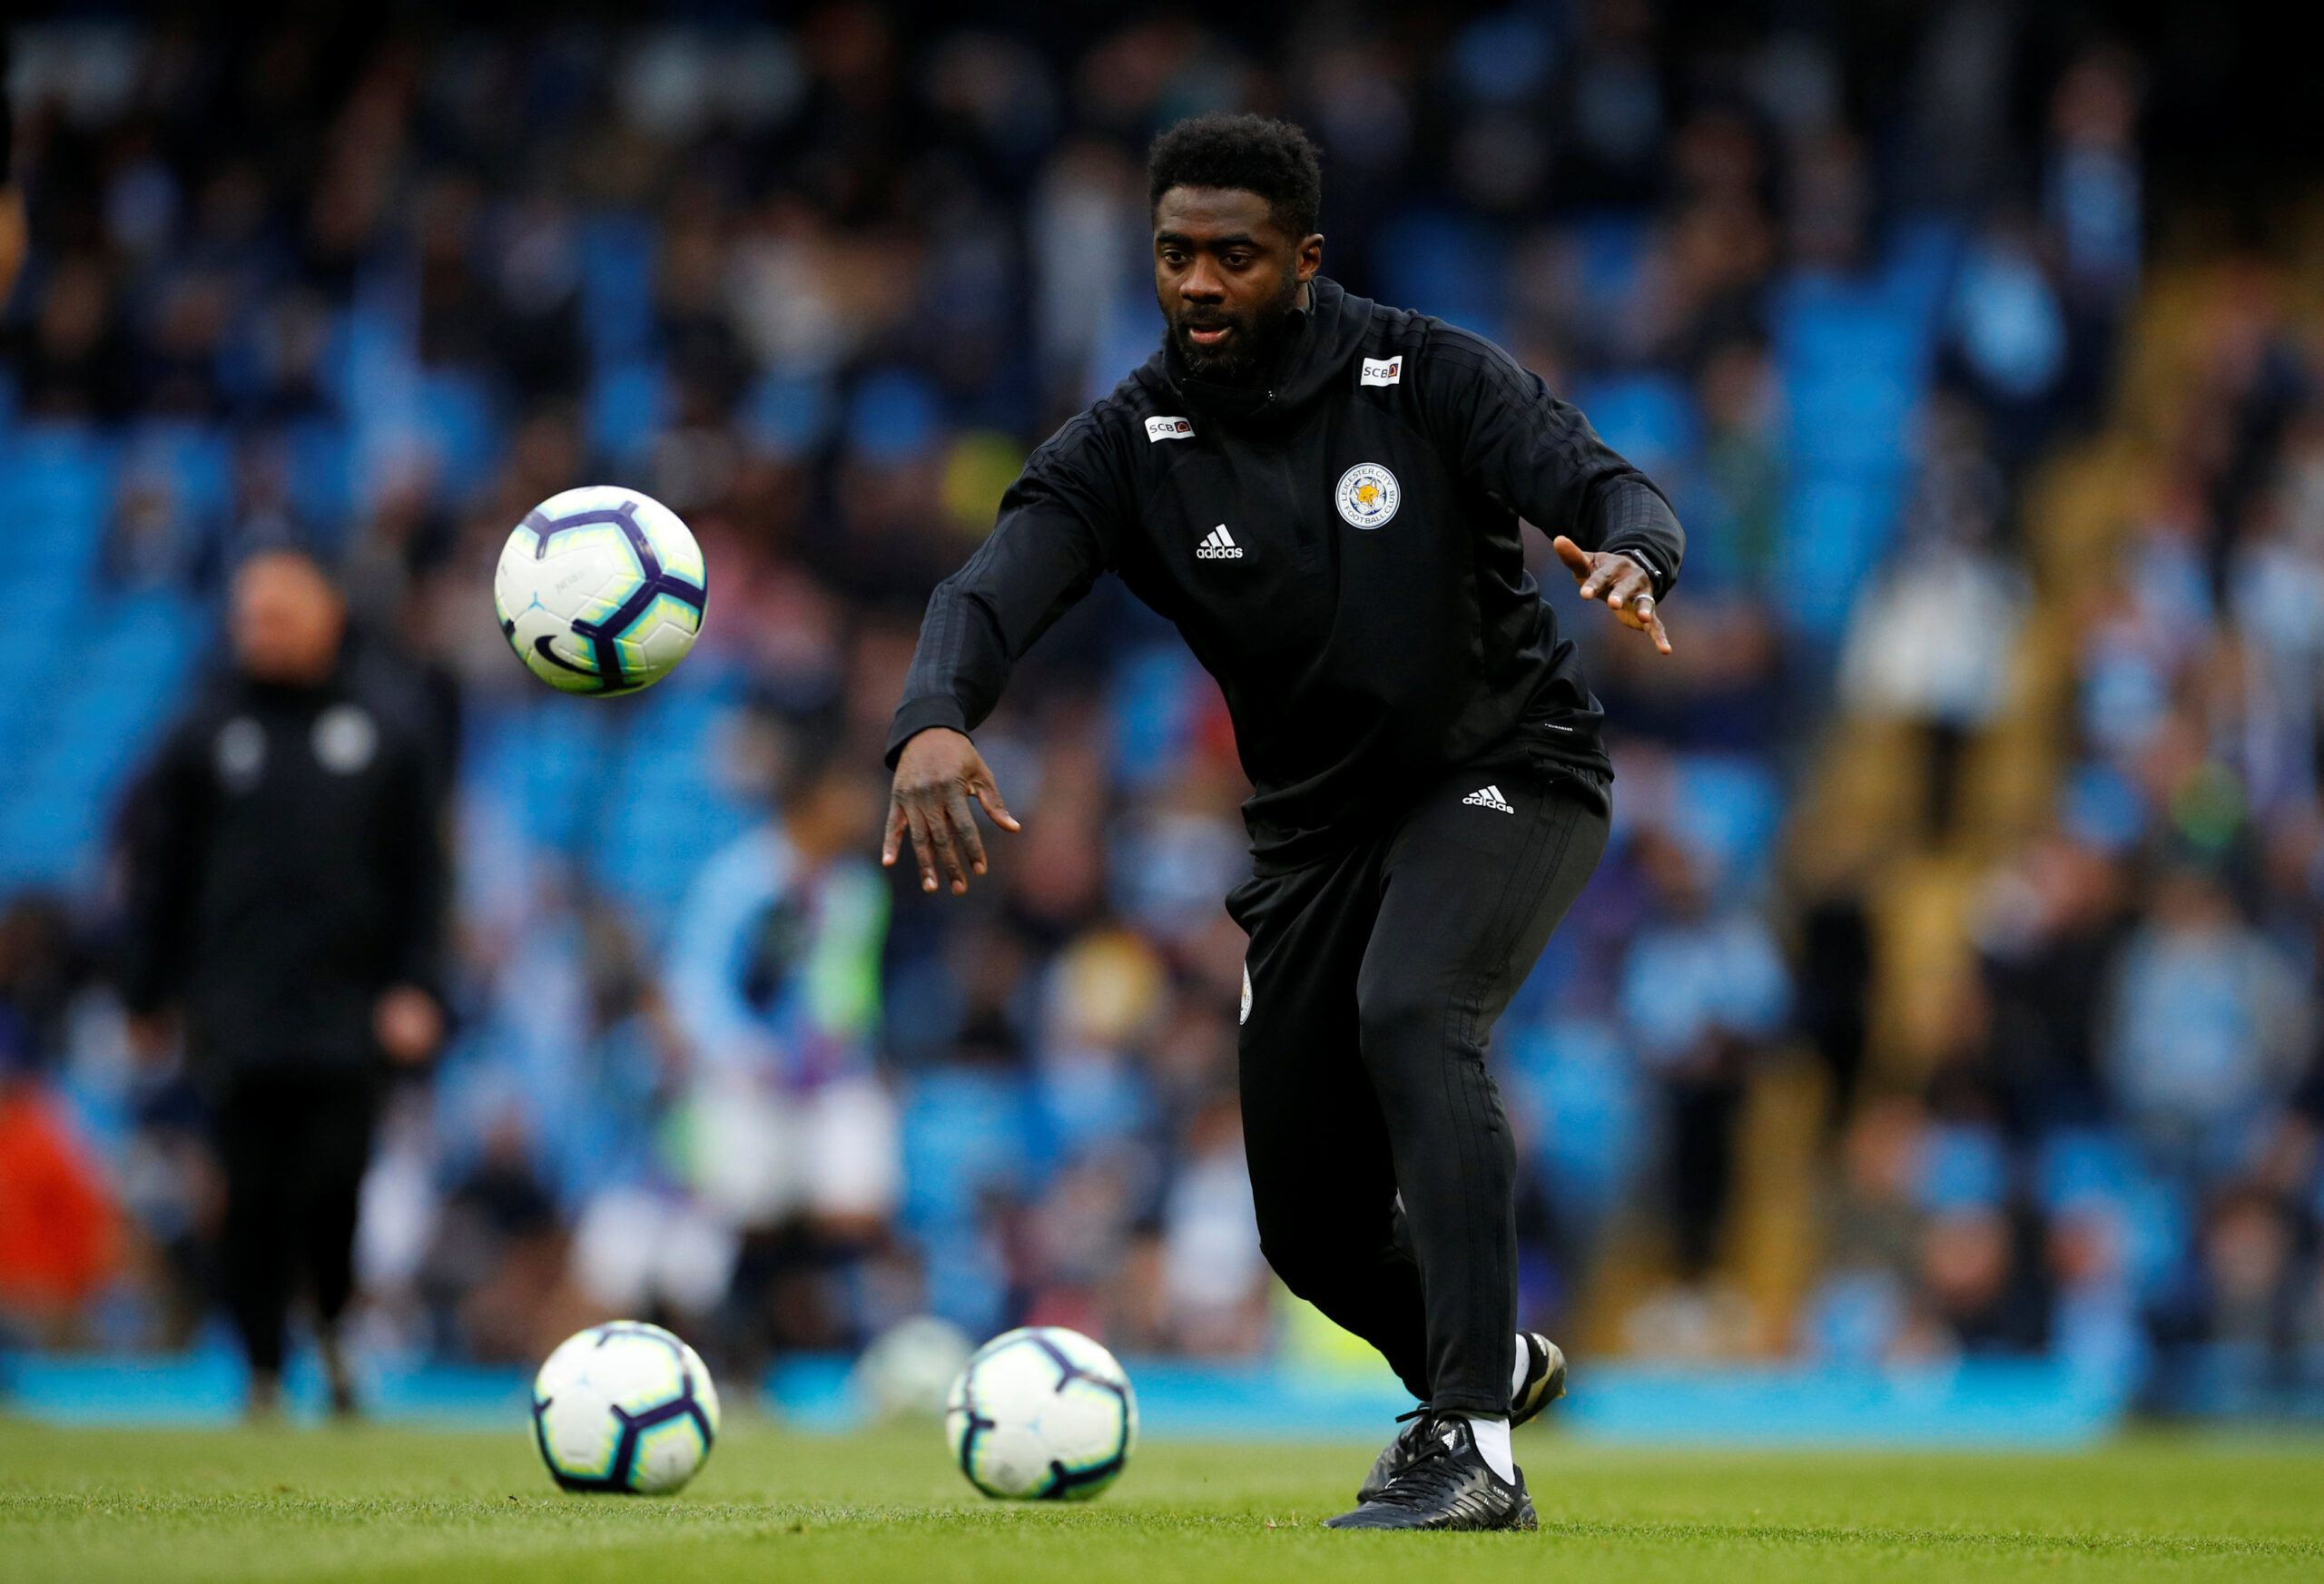 Soccer Football - Premier League - Manchester City v Leicester City - Etihad Stadium, Manchester, Britain - May 6, 2019  Leicester City first team coach Kolo Toure during the warm up before the match   REUTERS/Phil Noble  EDITORIAL USE ONLY. No use with unauthorized audio, video, data, fixture lists, club/league logos or 